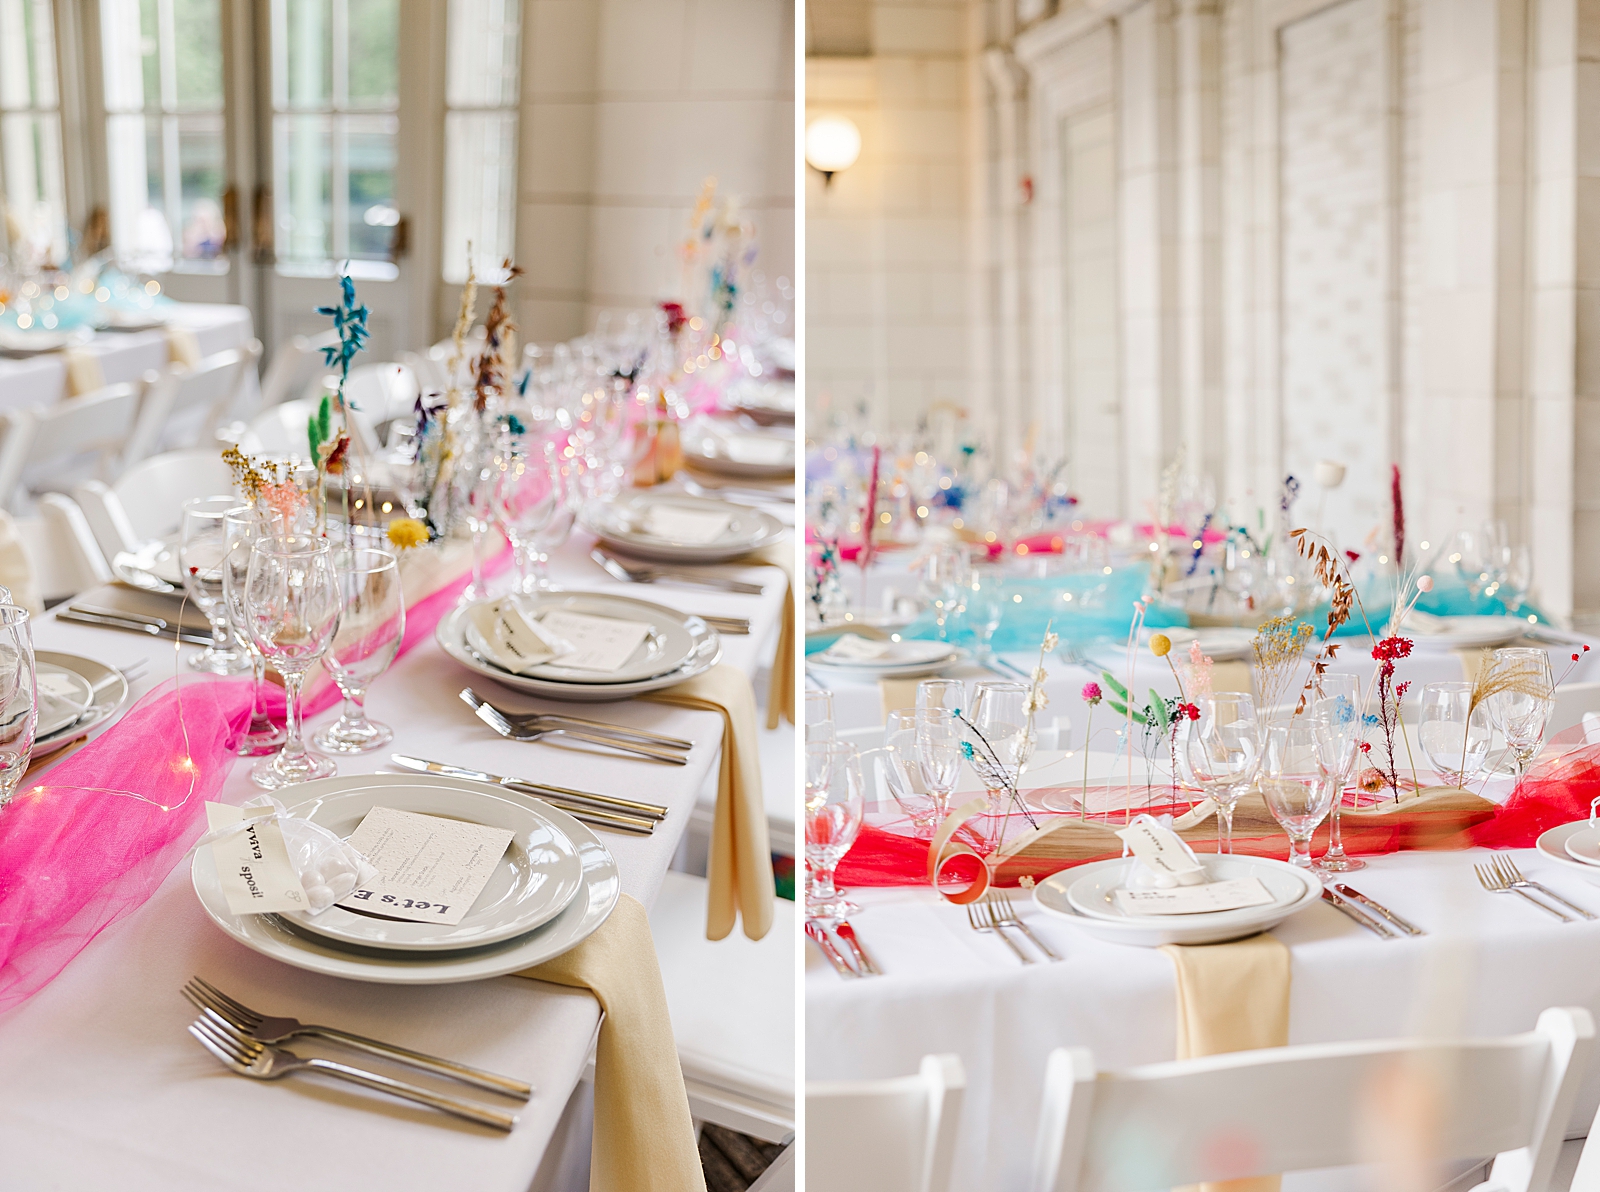 Left: Shot of reception tables complete with glasses, plates, cutlery, floral arrangements, and colorful tulle centerpieces.
Right: Shot of reception tables complete with glasses, plates, cutlery, floral arrangements, and colorful tulle centerpieces.